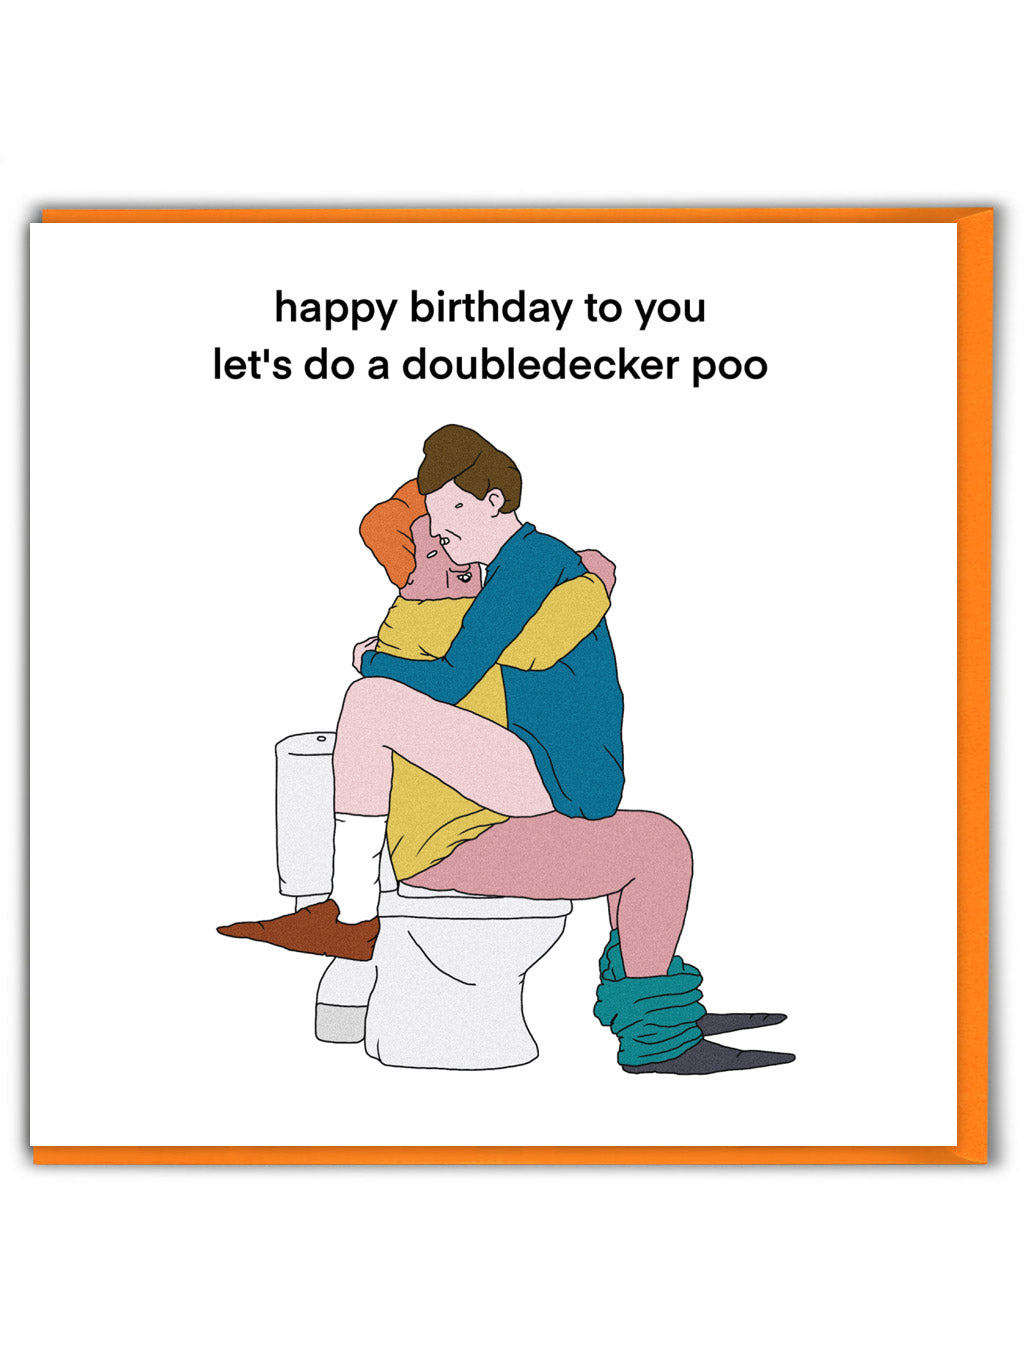 A greetings card with a white background and an illustration of two white people straddling each other on a toilet and the words above them stating 'happy birthday to you let's do a double decker poo'.